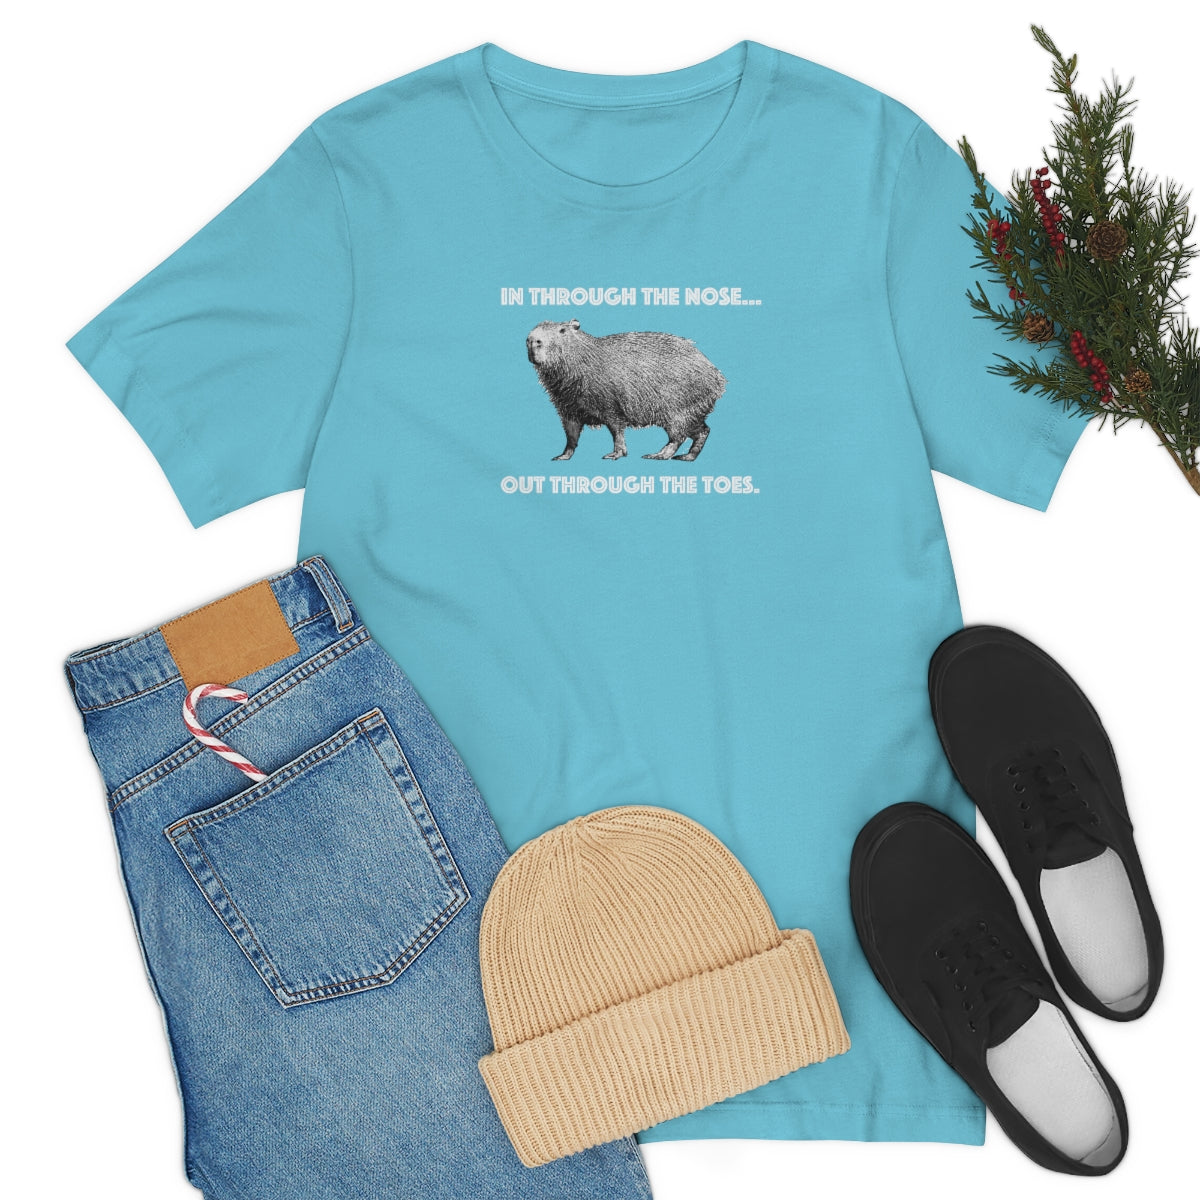 Lunch Therapy - Capybara In Through the Nose... -  Unisex Jersey Short Sleeve Tee